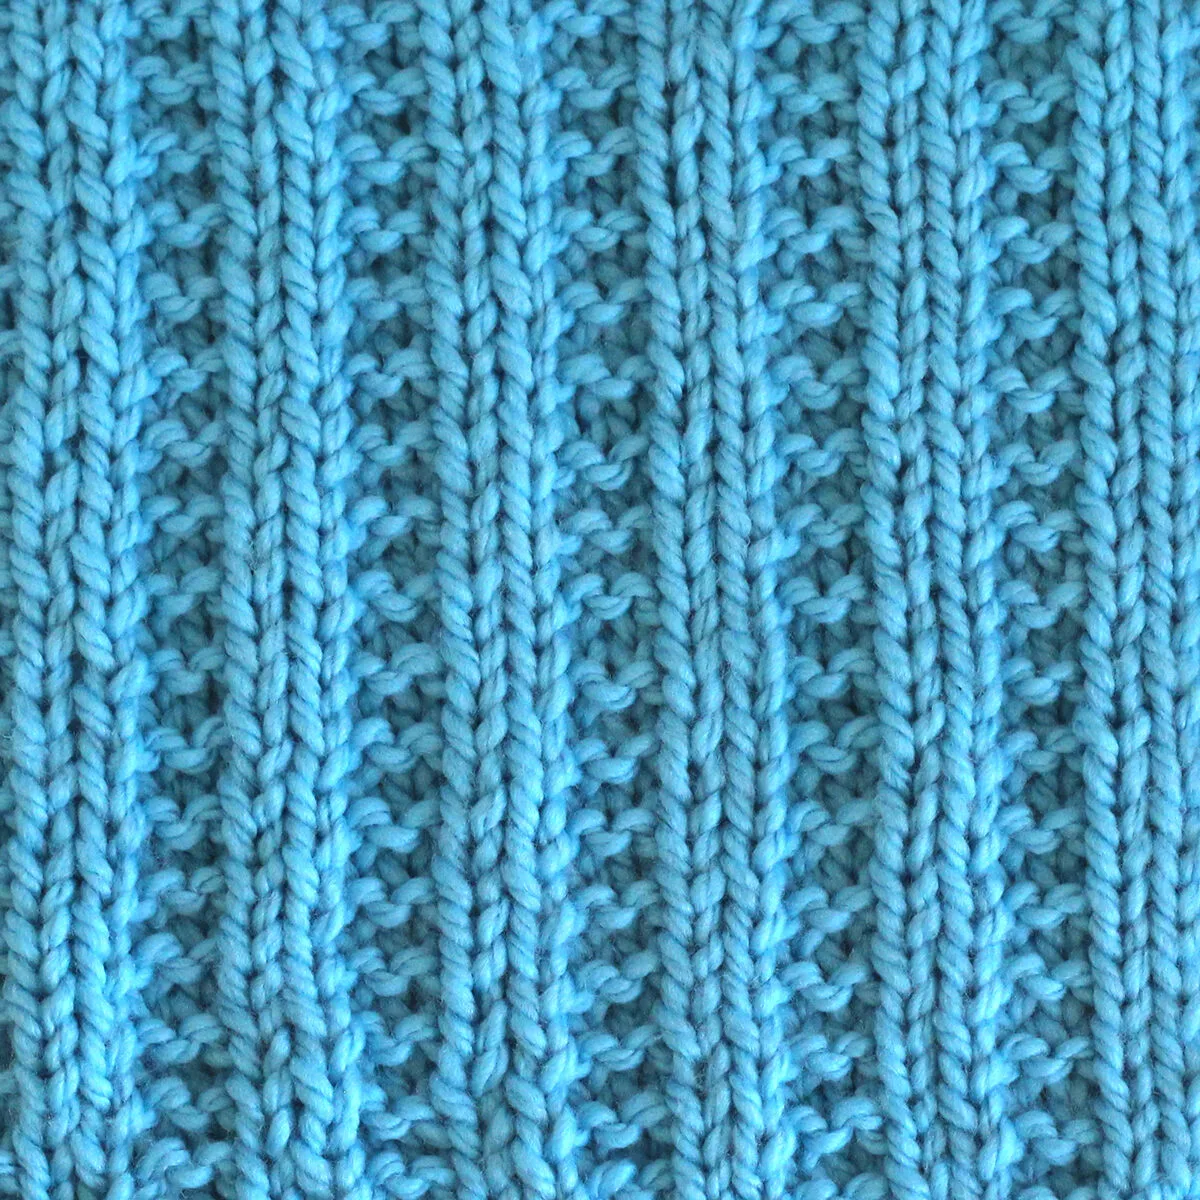 Garter Ribbing knit stitch texture in blue color yarn.